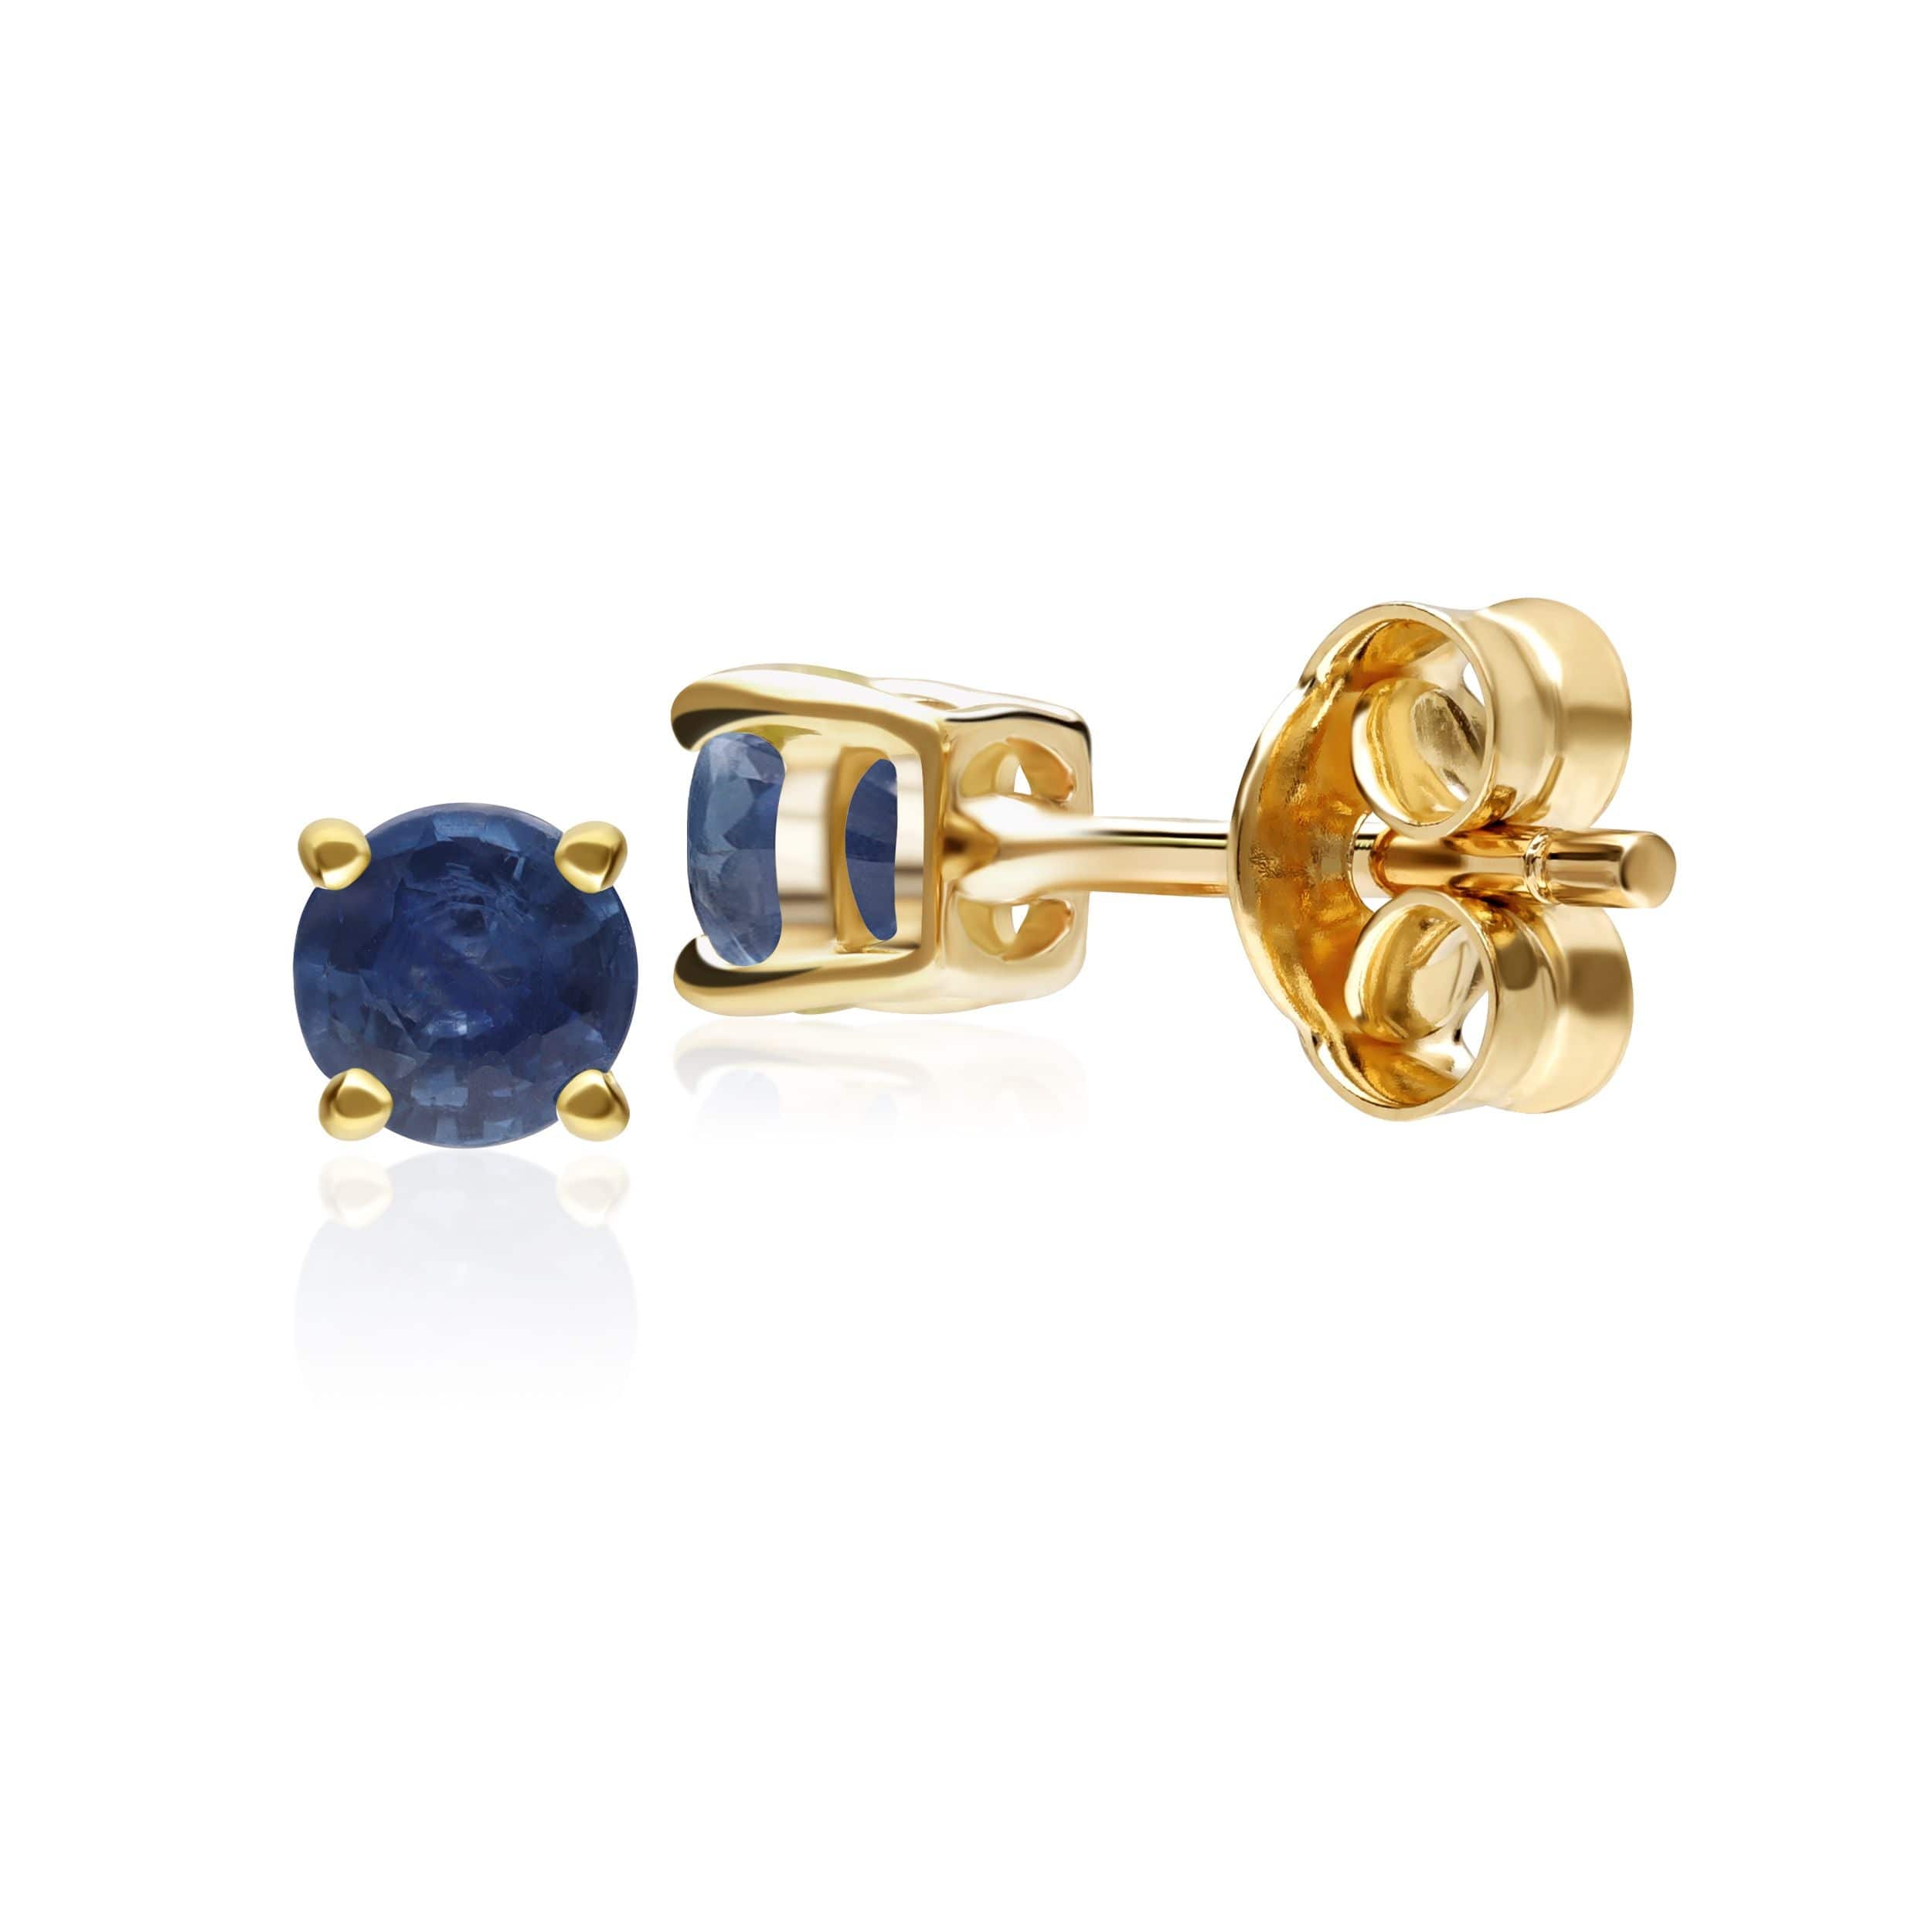 11559 Classic Round Sapphire Stud Earrings in 9ct Yellow Gold 3.5mm 2